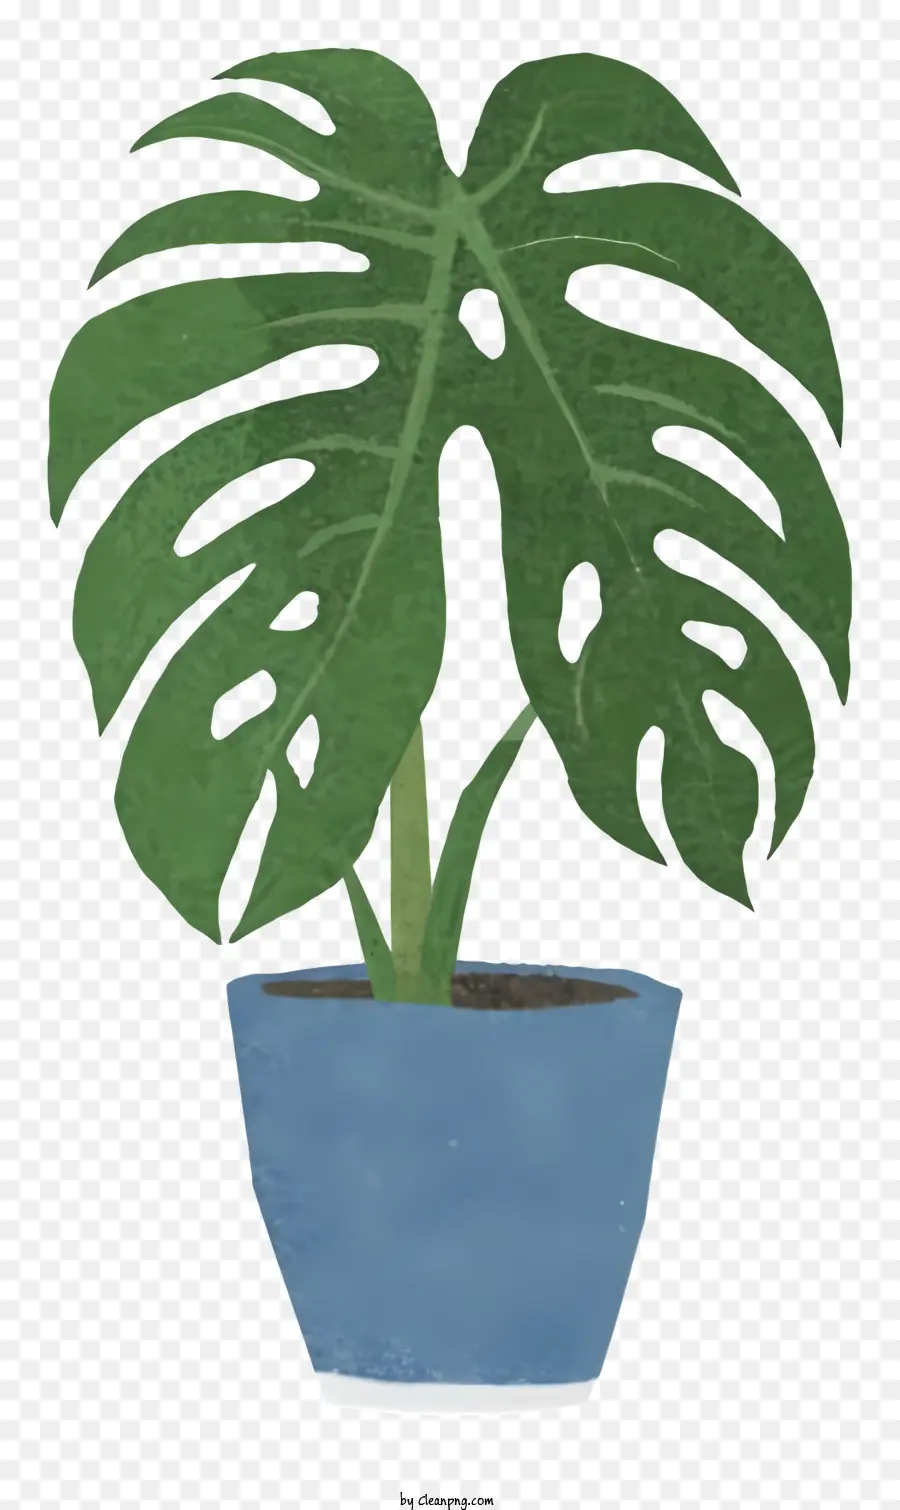 large blue pot green leafy plant leaning plant spread out leaves blue tinted pot